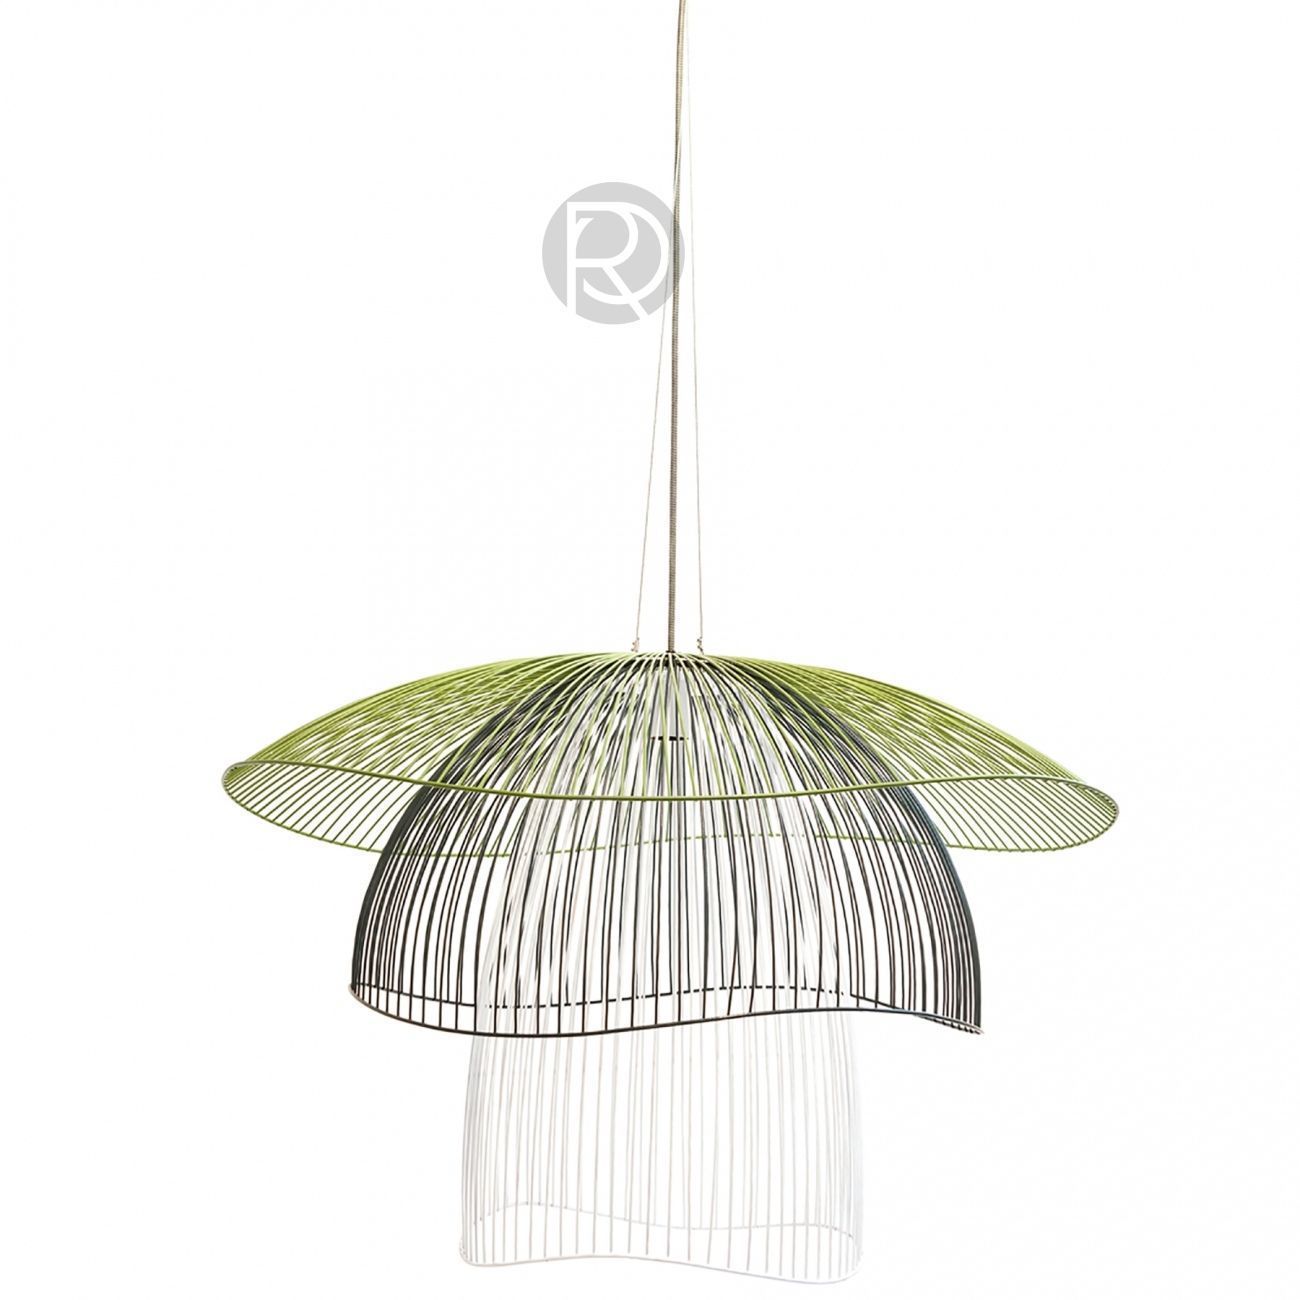 Hanging lamp PAPILLON L by Forestier